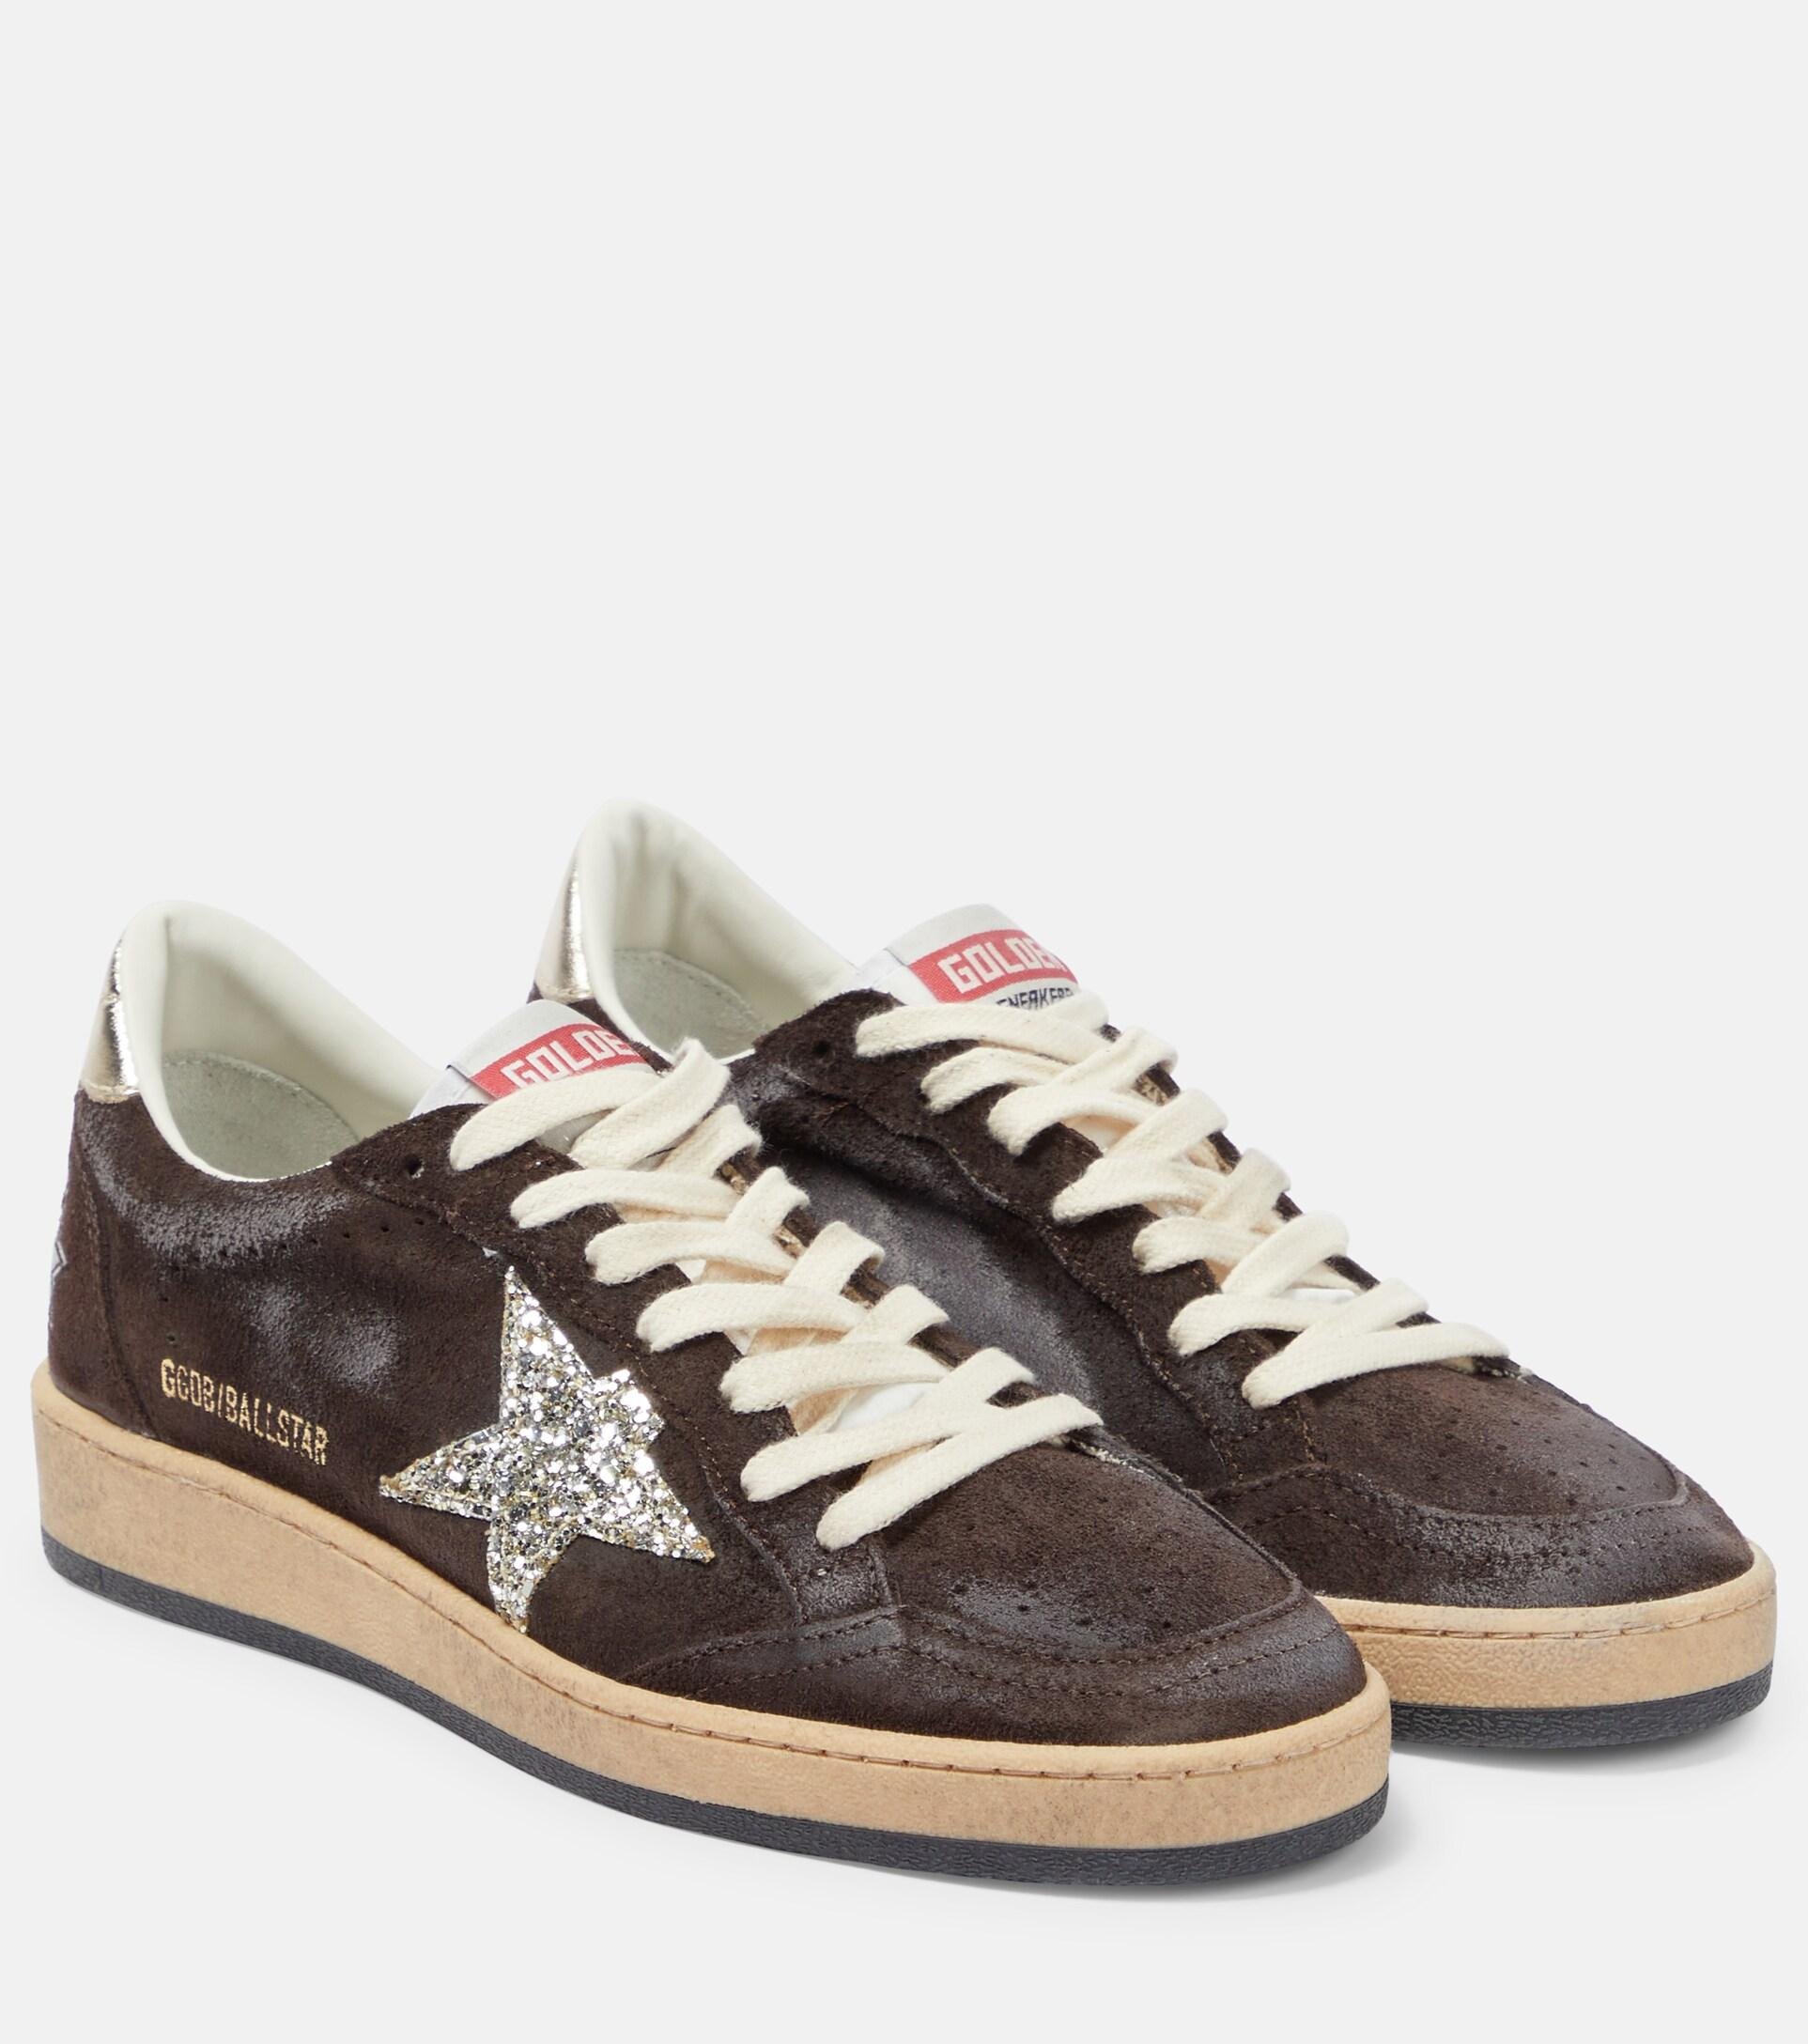 Golden Goose Ball Star Embellished Leather Sneakers in Brown | Lyst